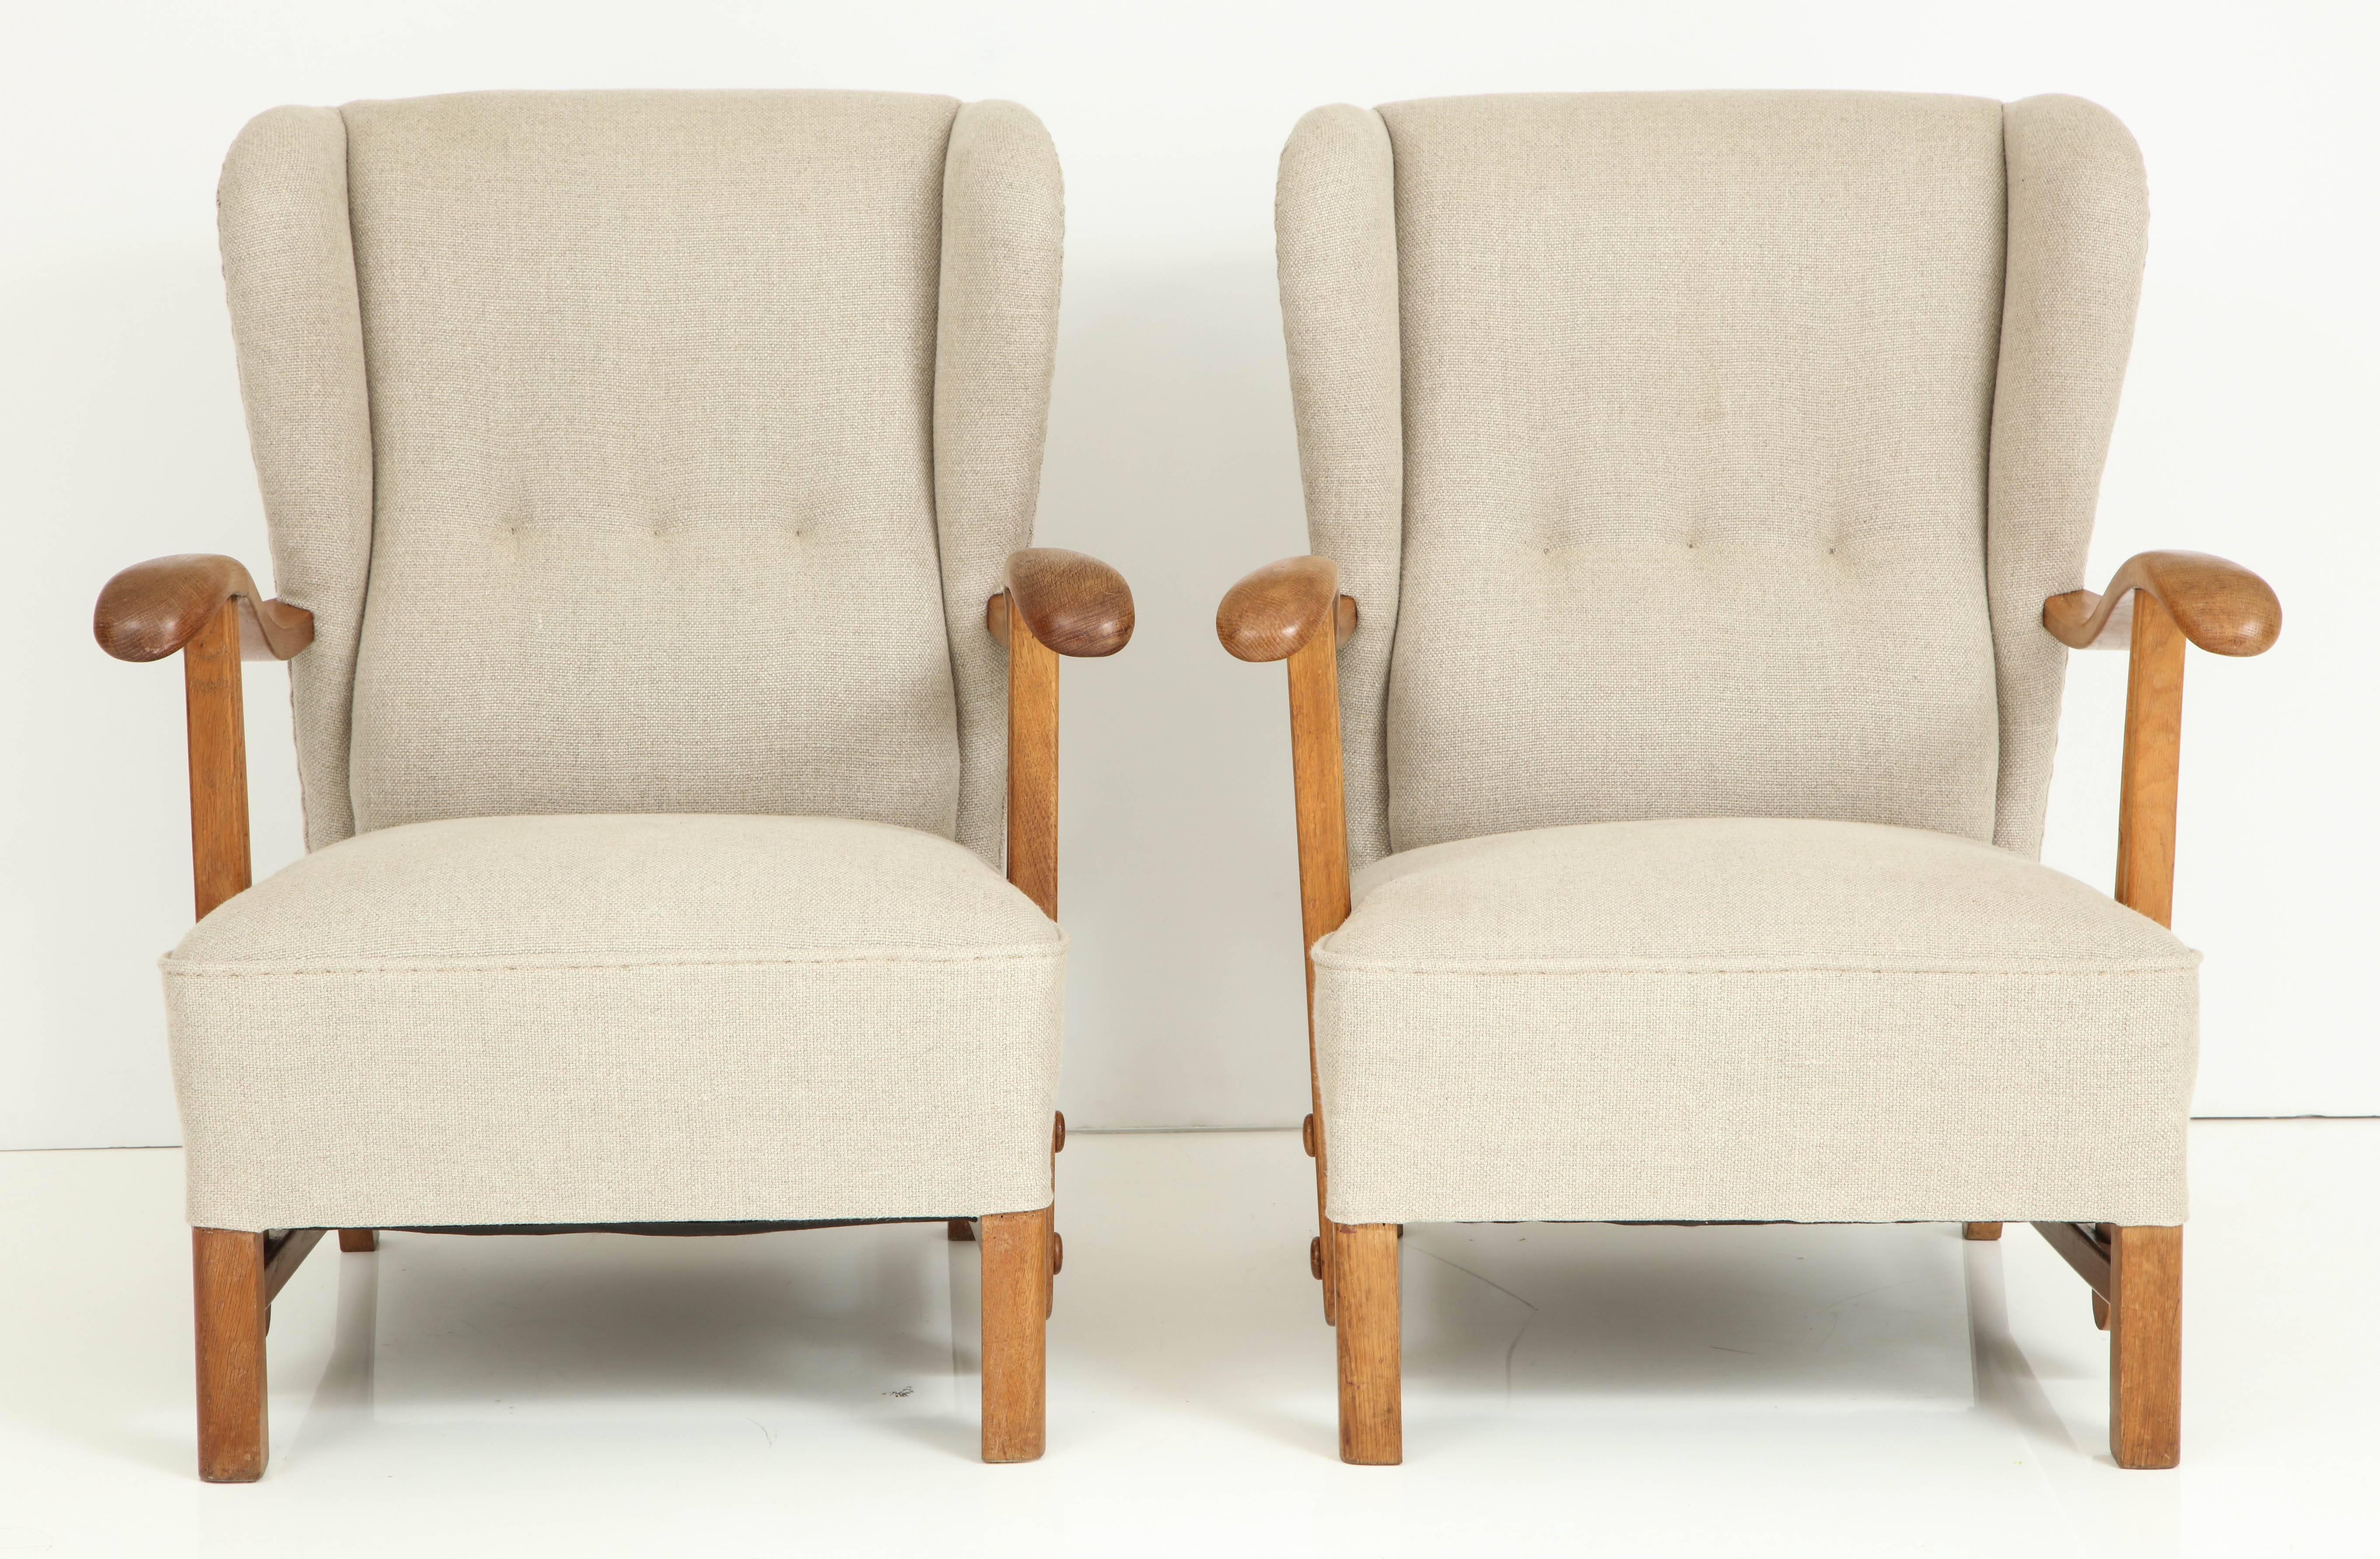 A pair of Danish oak and linen upholster open armchairs, circa 1940s, each with a tufted wing back, curved armrests raised on straight supports with dowels, and square legs joined by a stretcher.